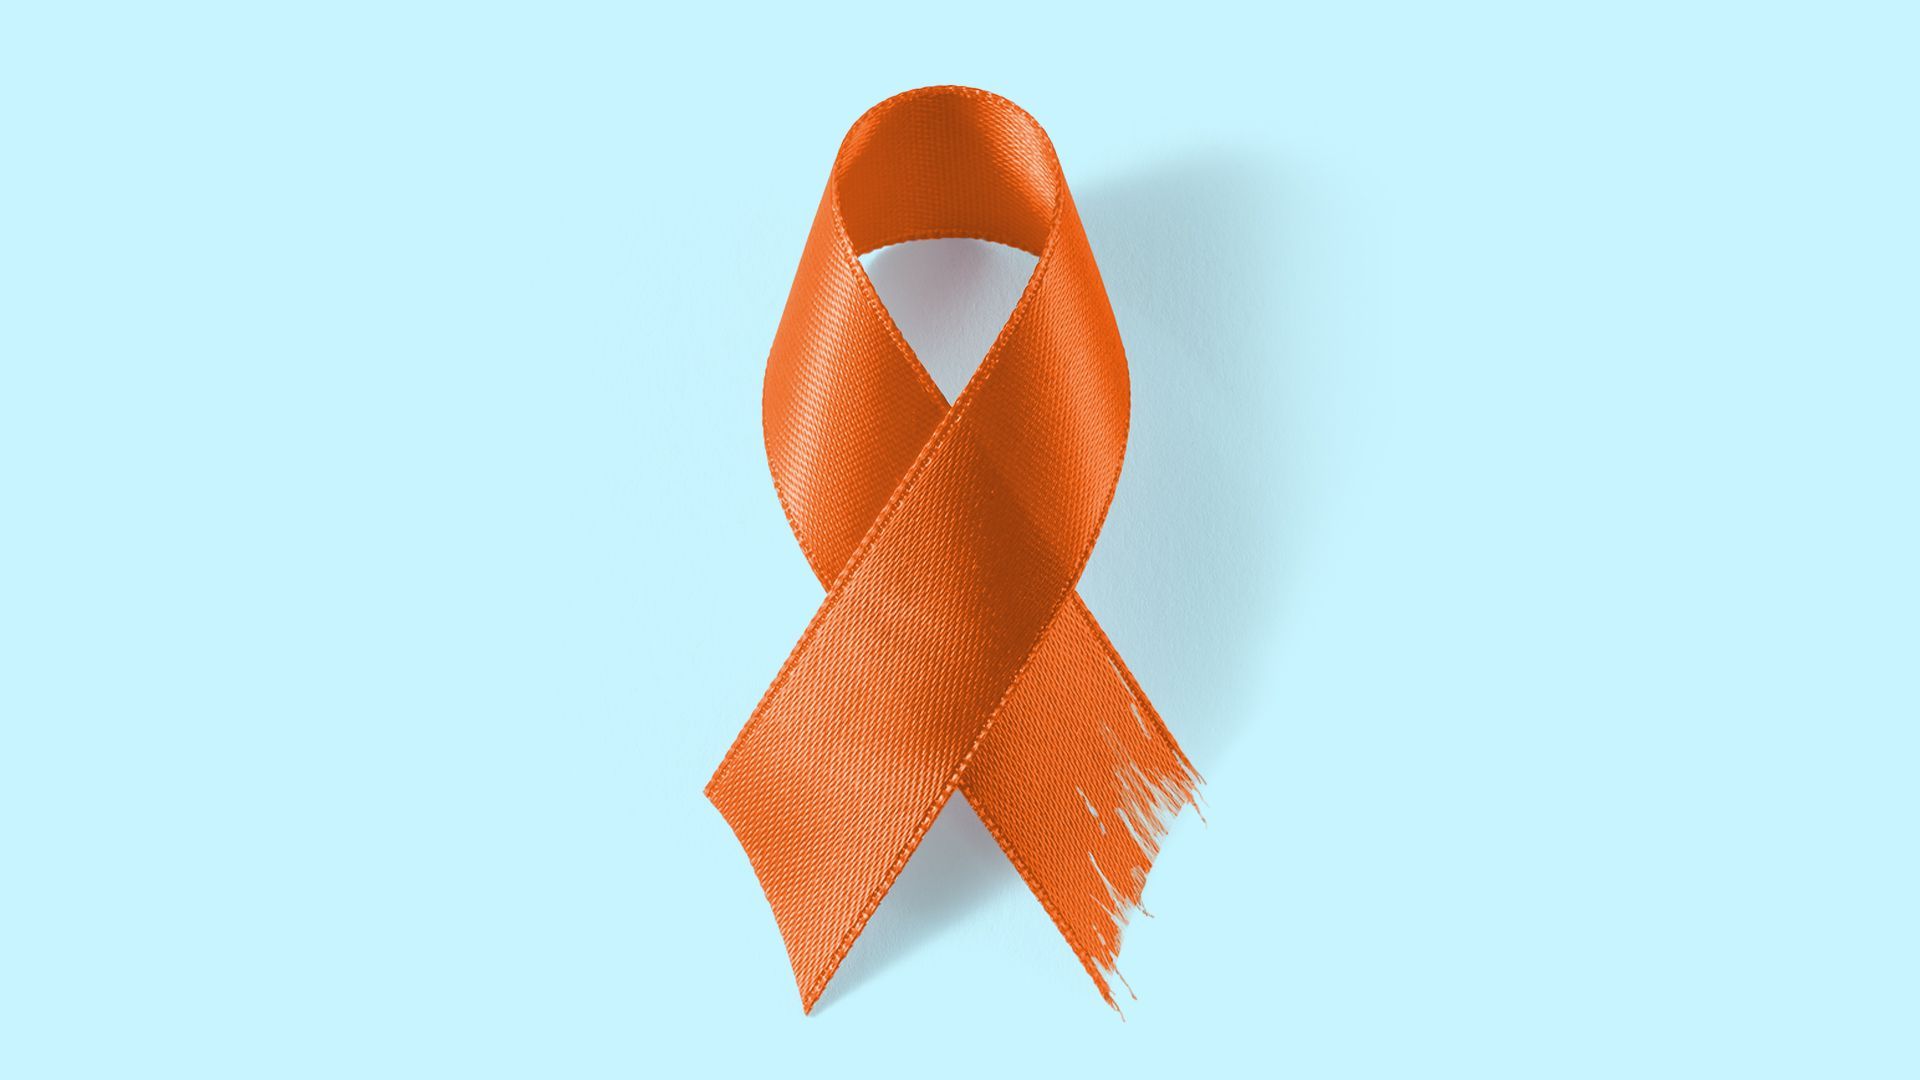 Illustration of a leukemia cause ribbon that is beginning to fray